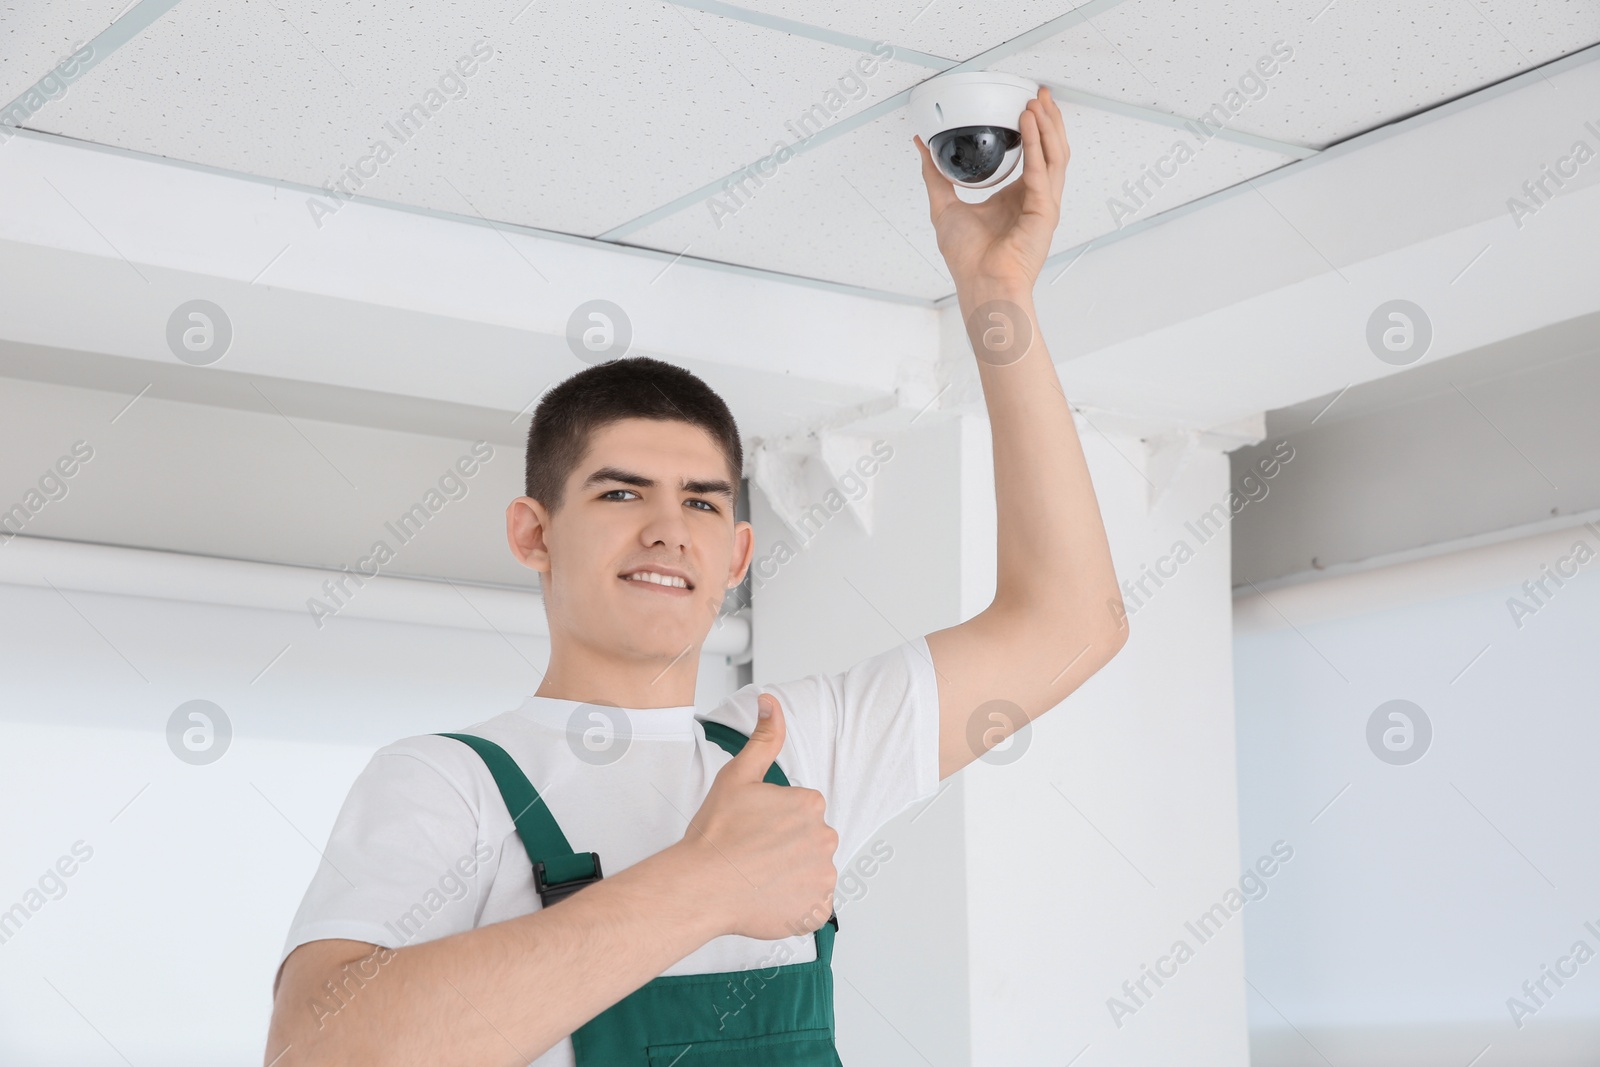 Photo of Technician showing thumbs up while installing CCTV camera on ceiling indoors